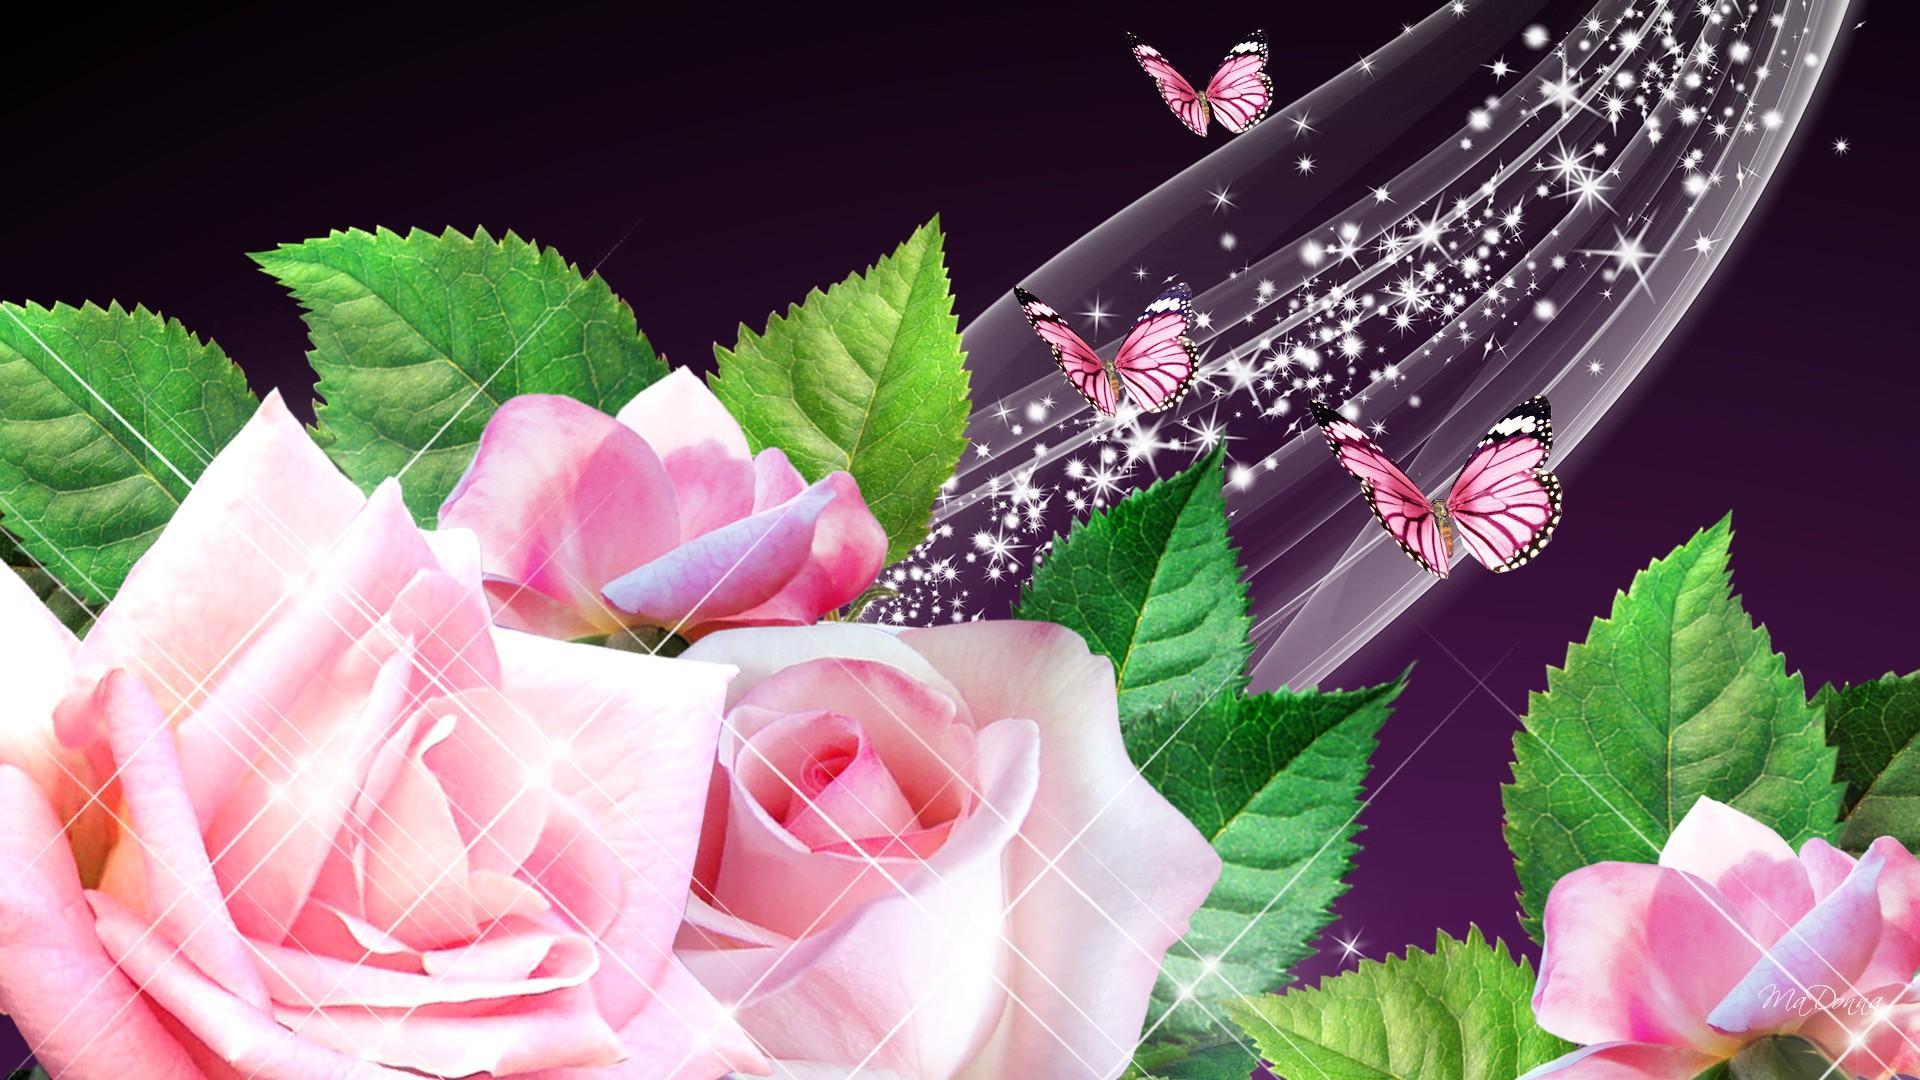 Wallpaper Bunga Mawar Merah 34 Image Collections Of - Butterfly Flowers Pink Shiny , HD Wallpaper & Backgrounds